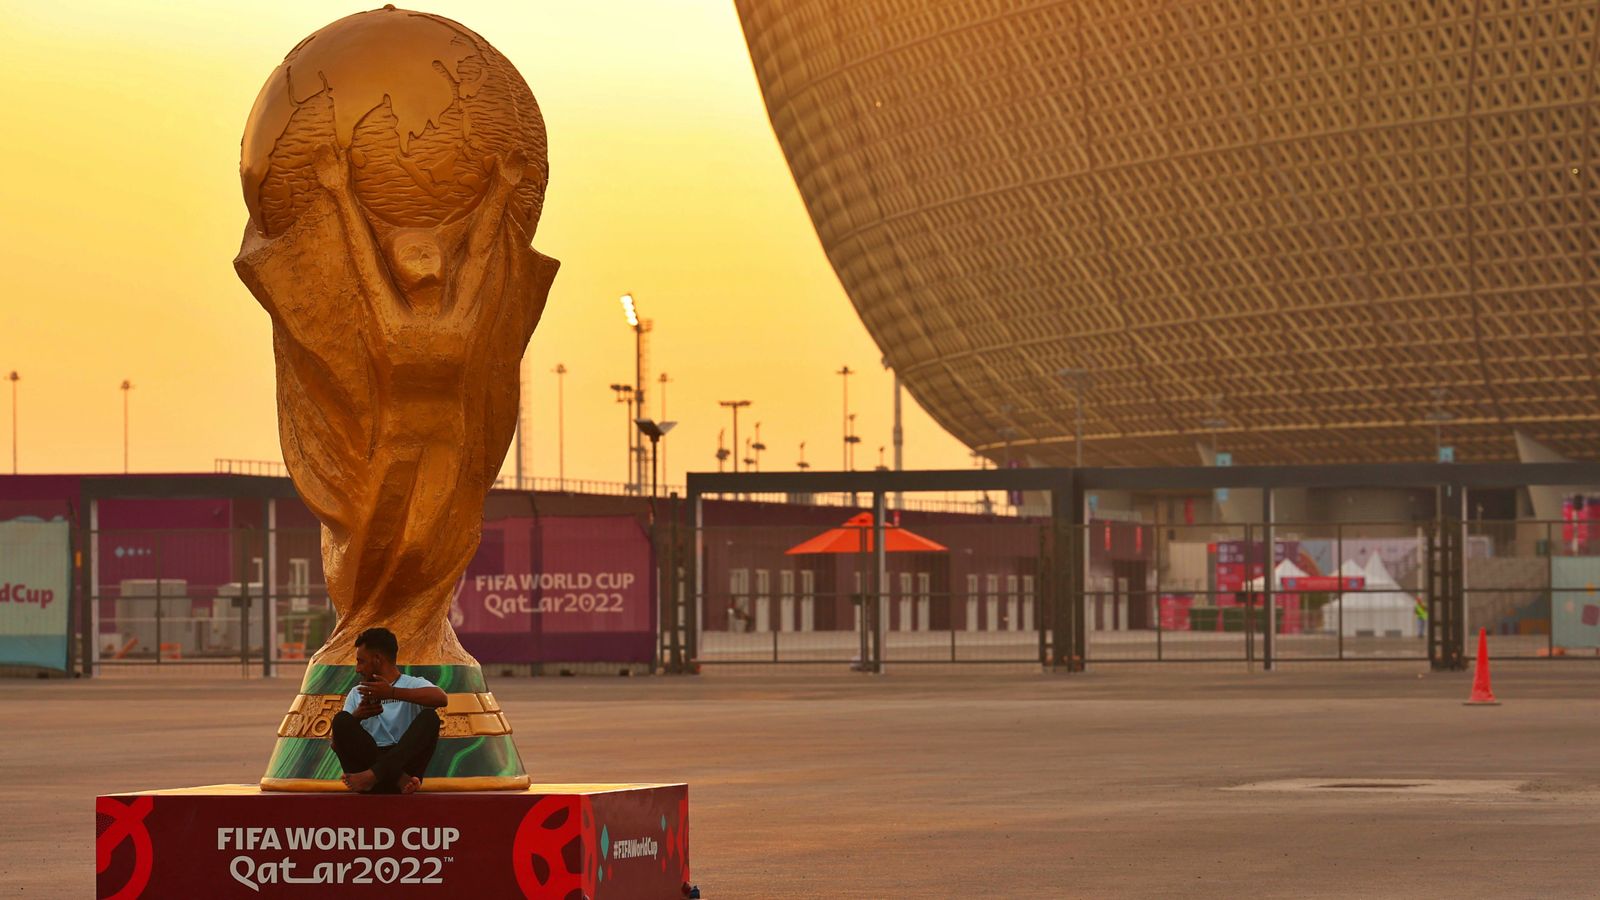 Qatar World Cup: Beer to be banned from stadiums, Sky News understands